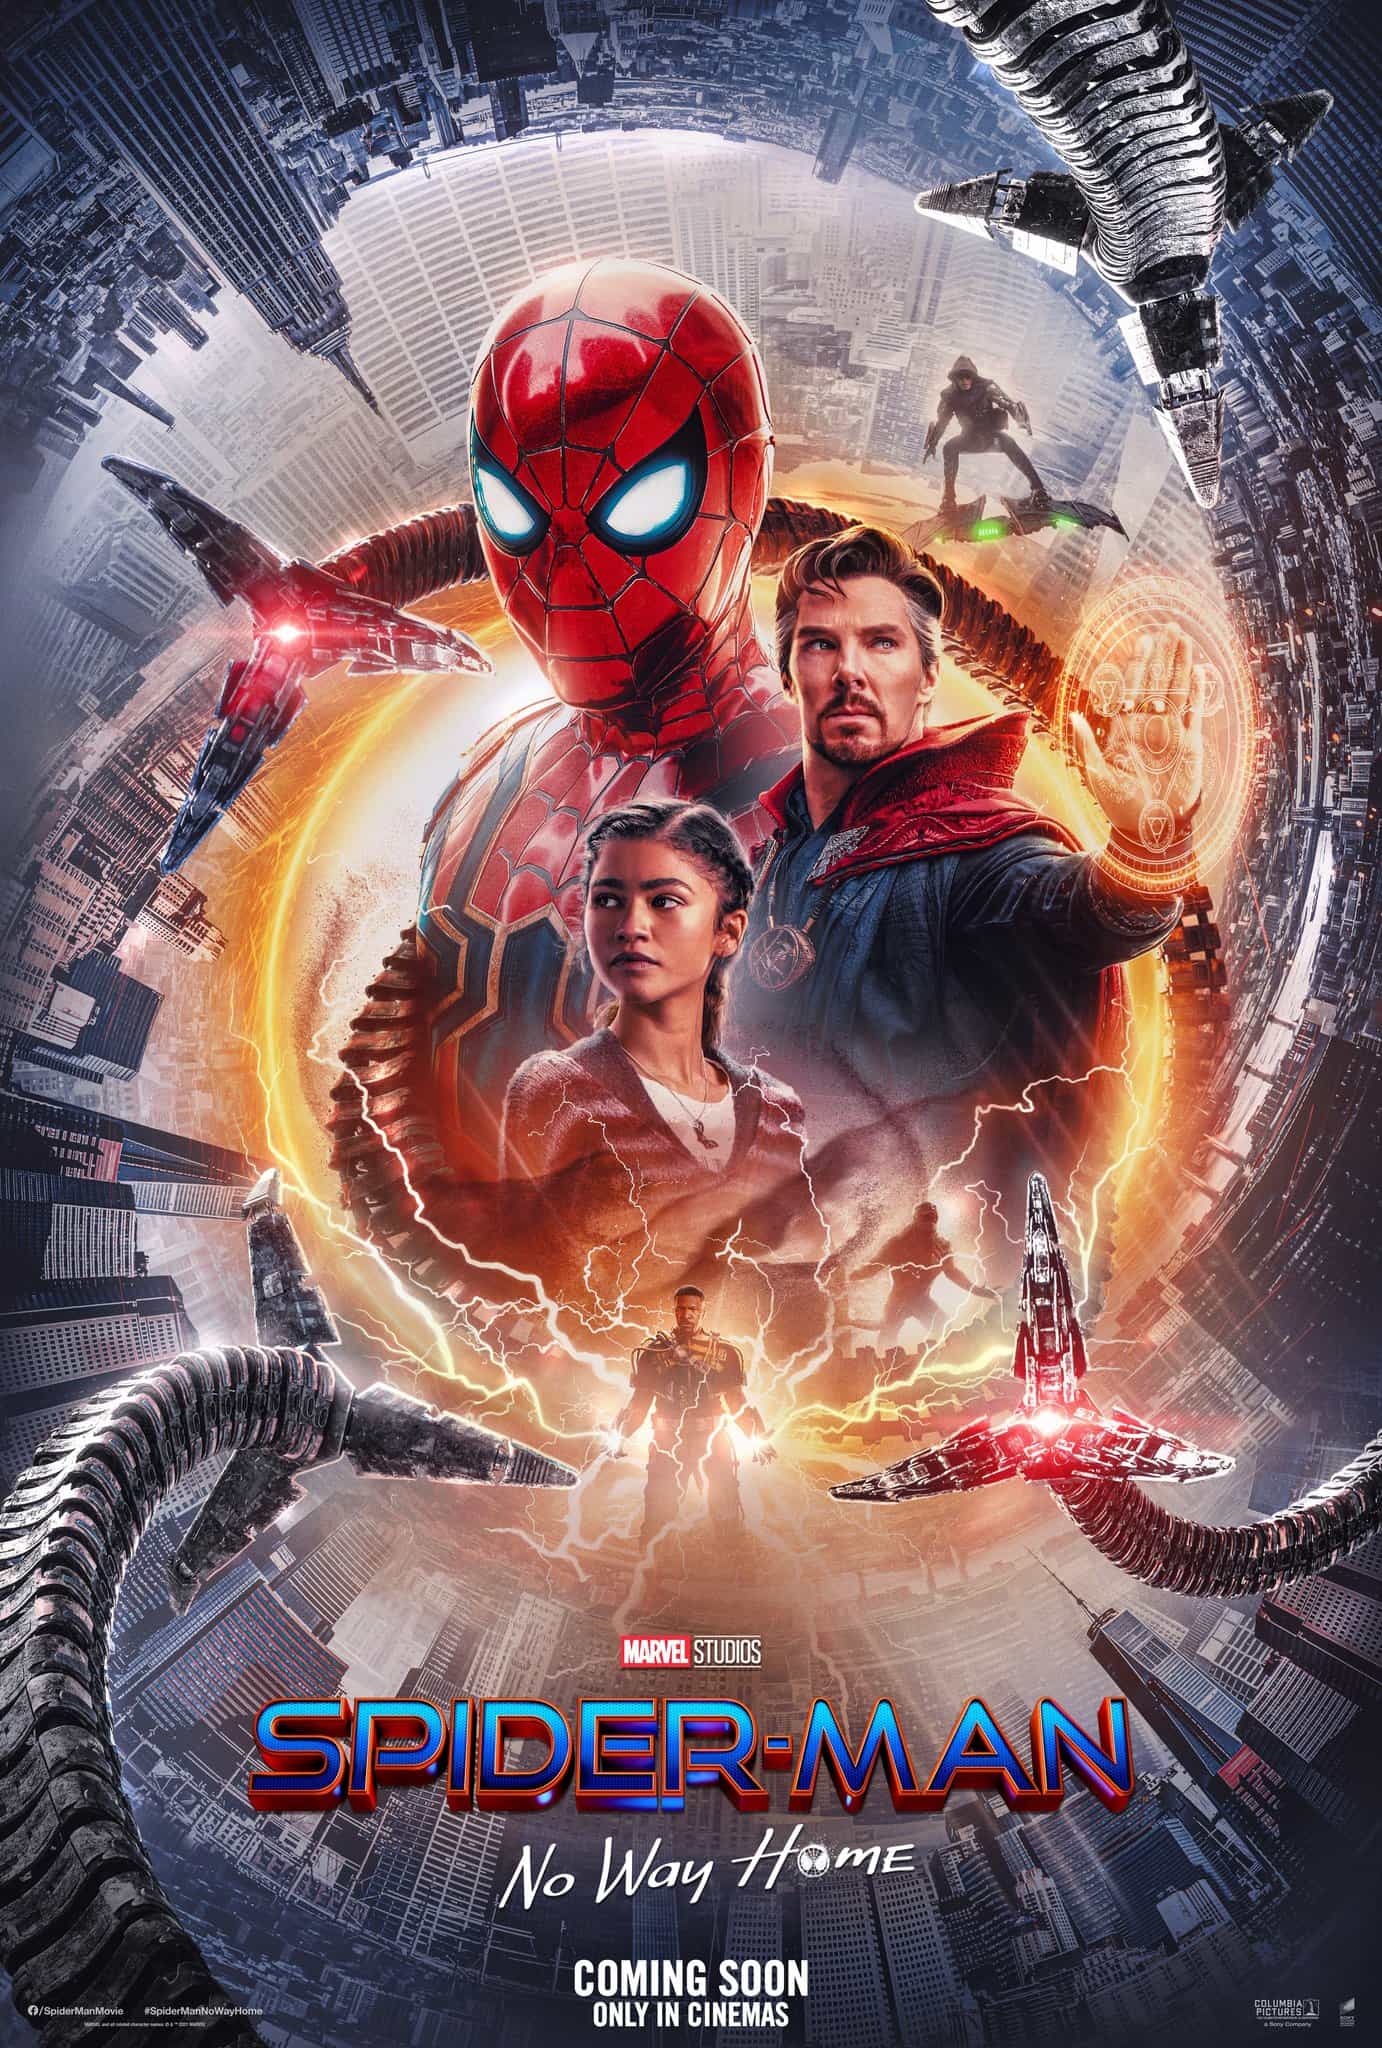 Global Box Office Figures 7th - 9th January 2022:  Spider-Man continues to reign over the box office for a fourth weekend